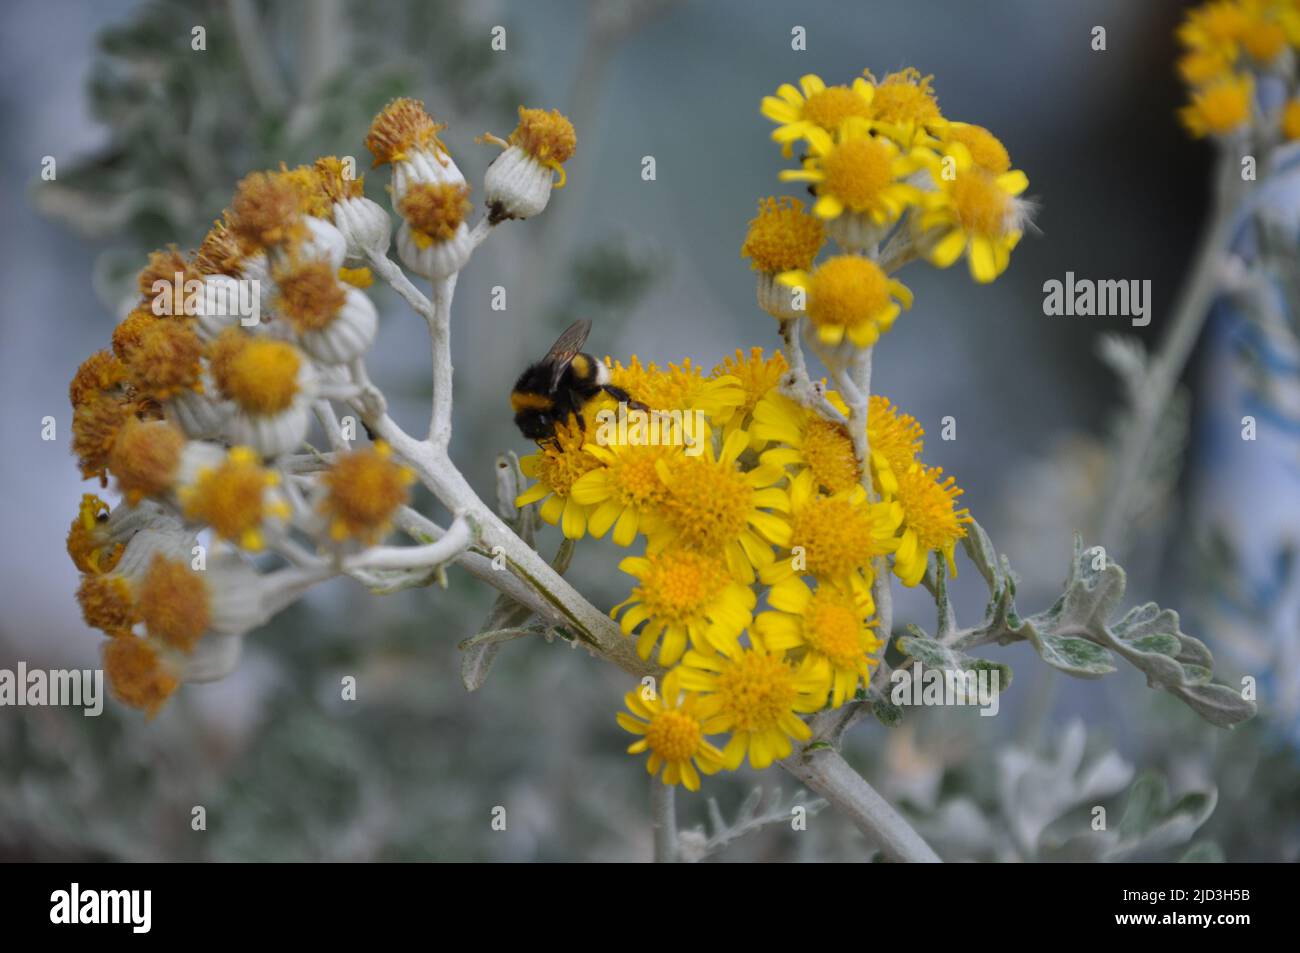 Bumble bee enjoying the Silver ragwort (Jacobaea maritima).Bee perched on yellow flower with green leaves background Stock Photo